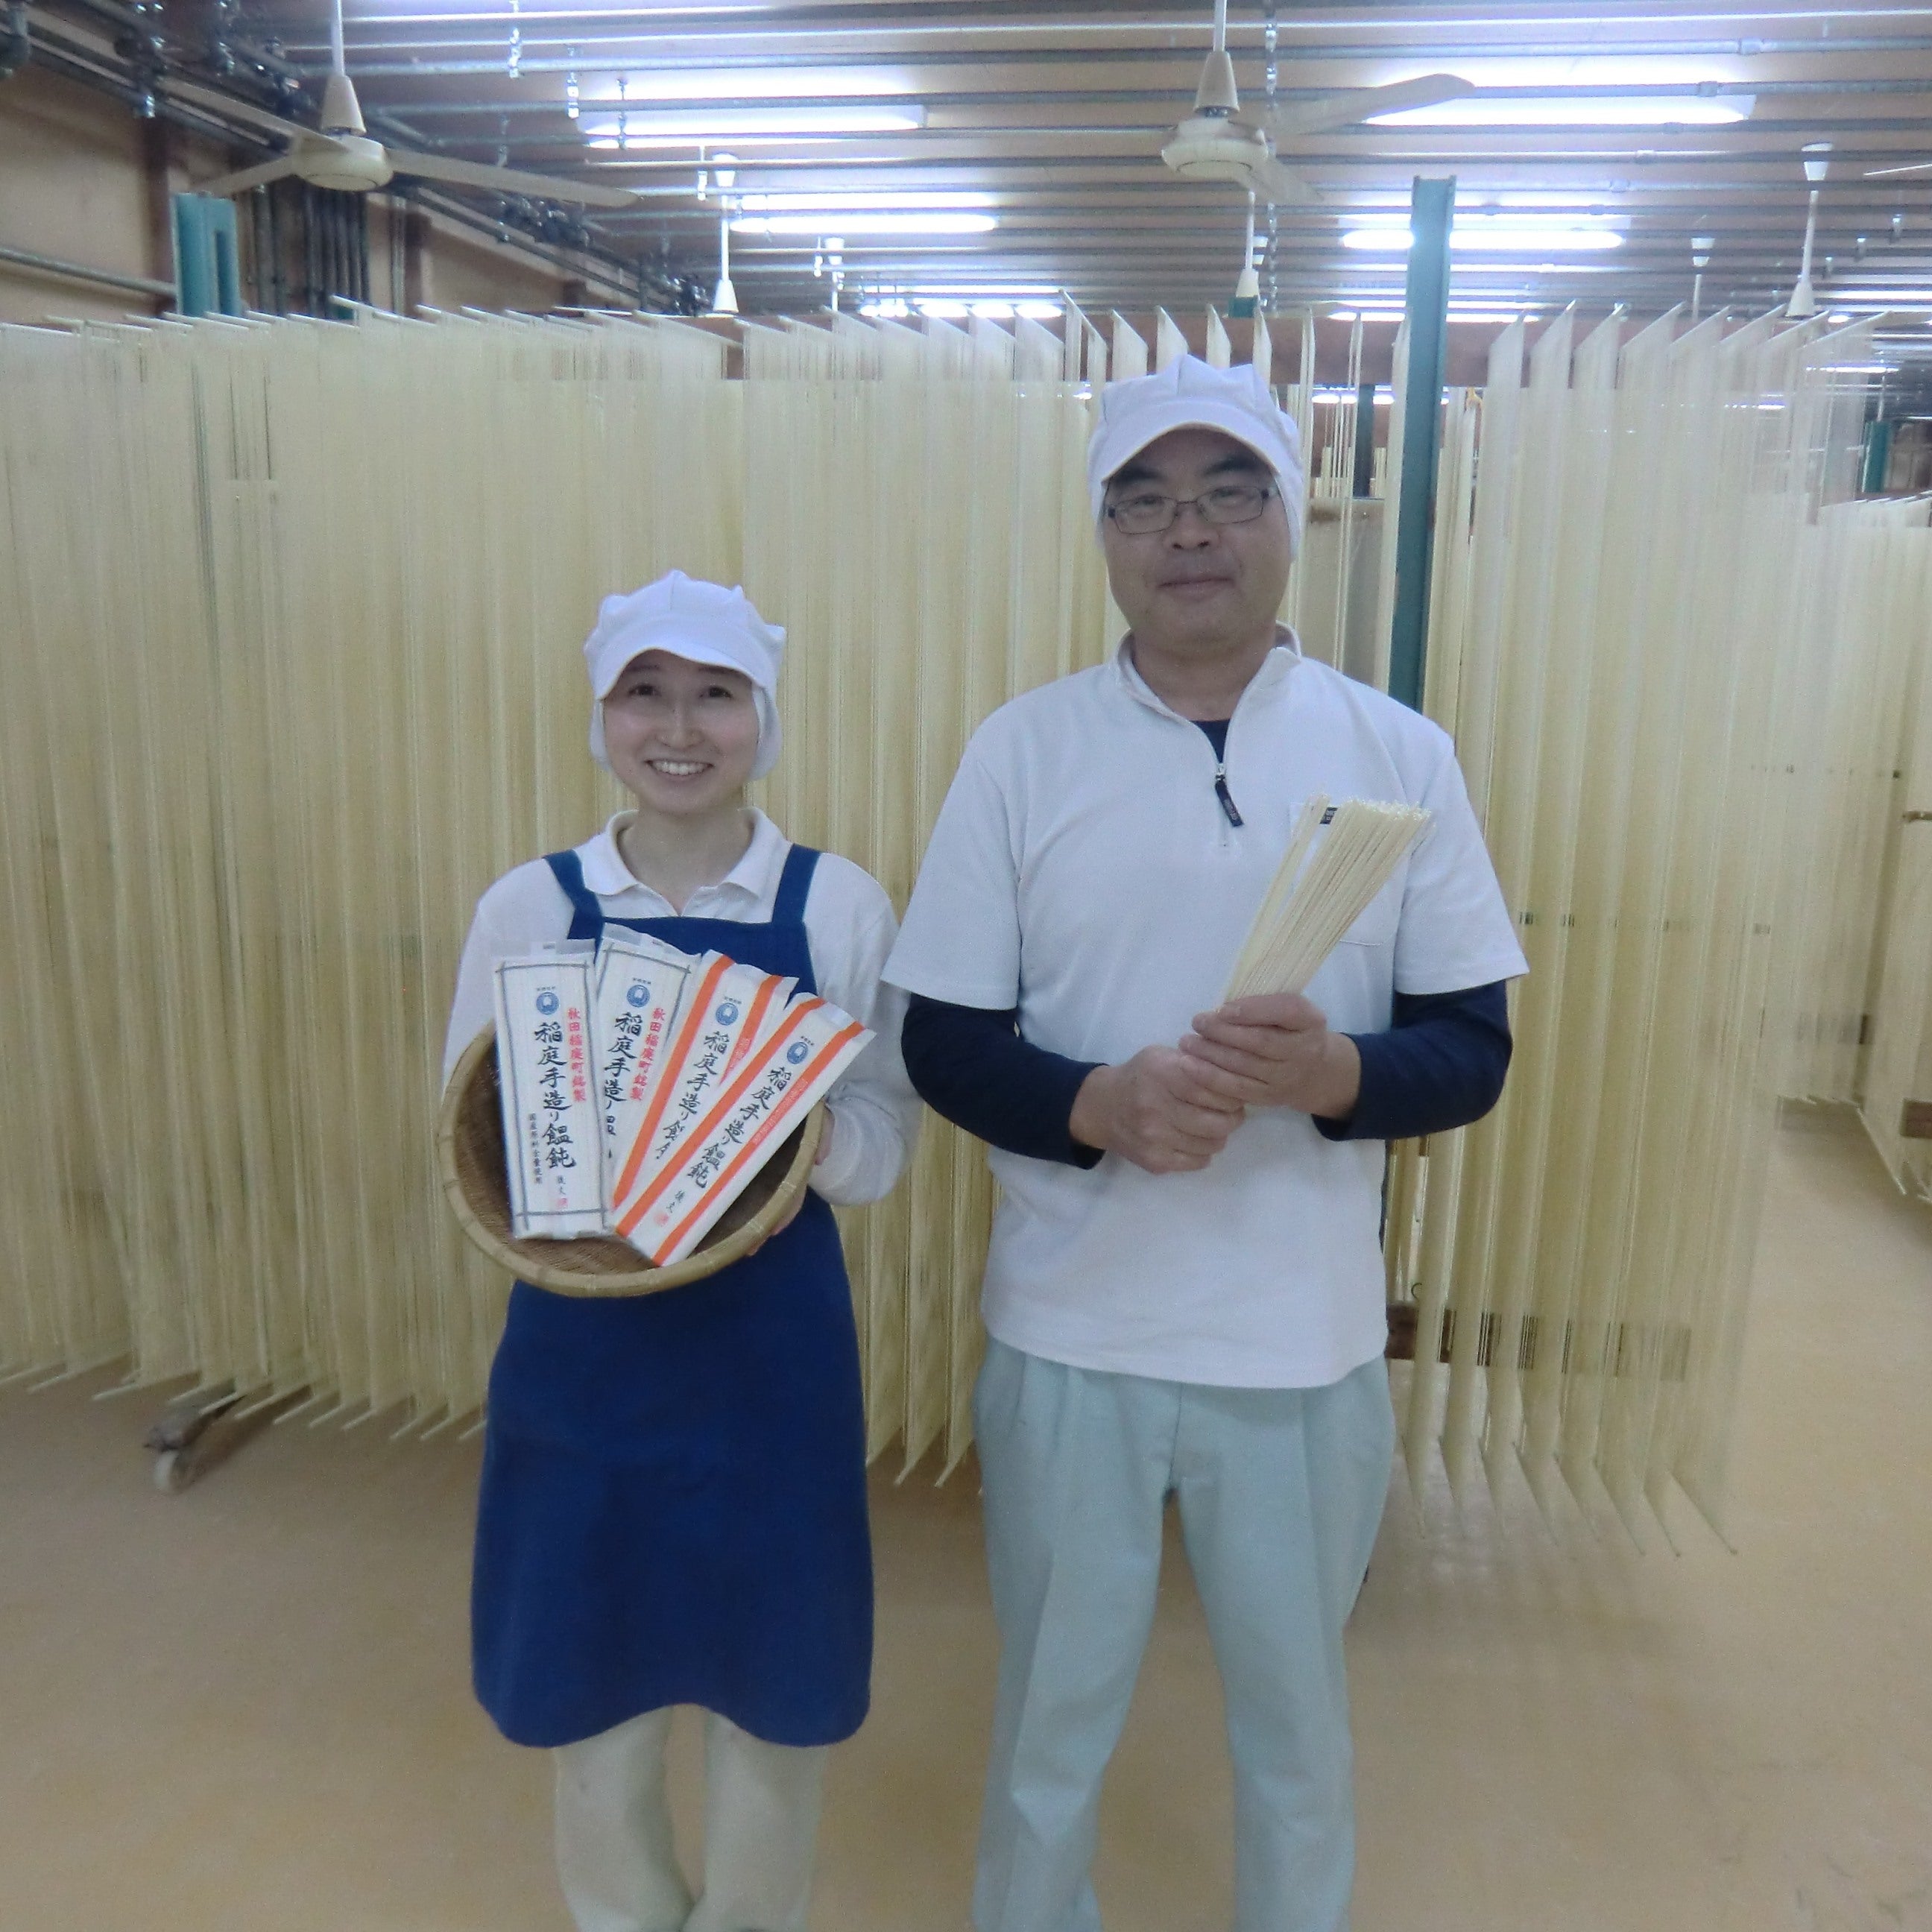 Two craftspeople holding noodles